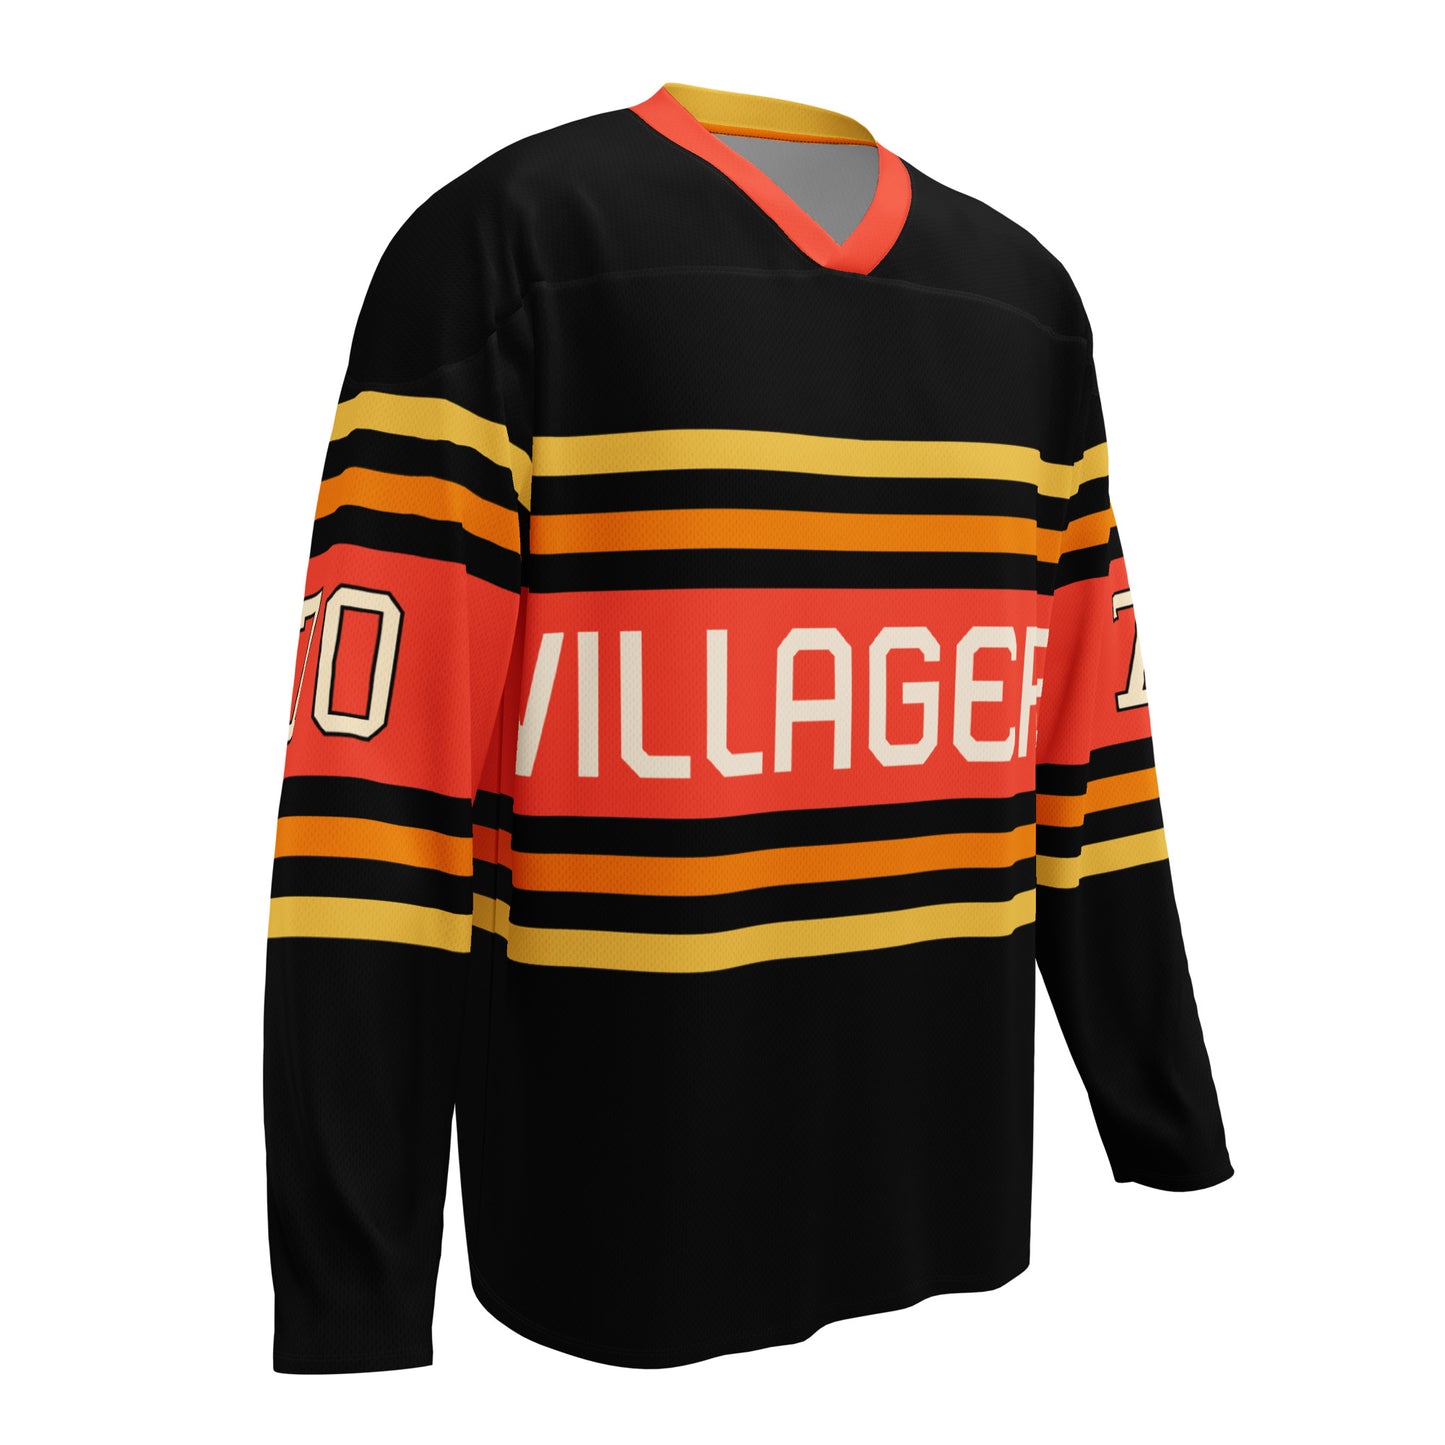 The Villagers Hockey Jersey